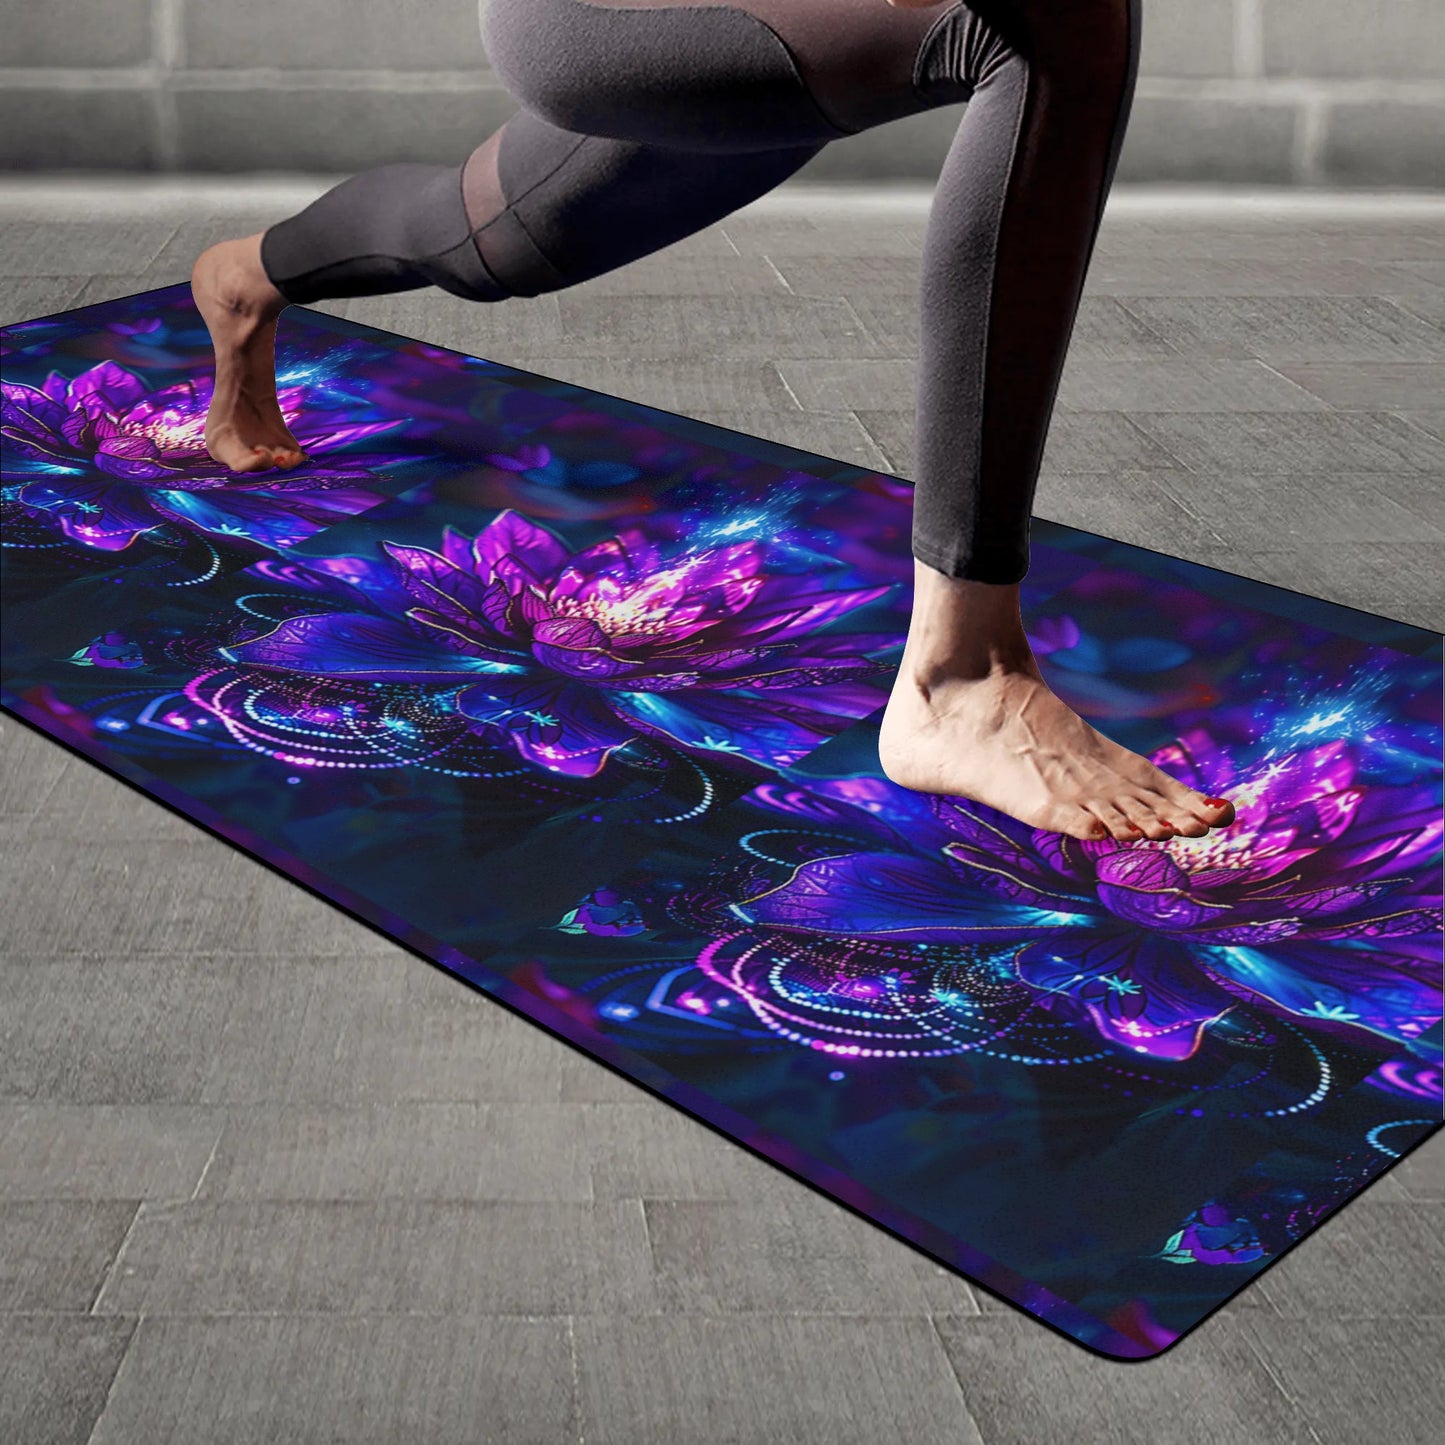 D'Sare Vibrant Collection: Colorful Yoga Mats for Inspired Practices